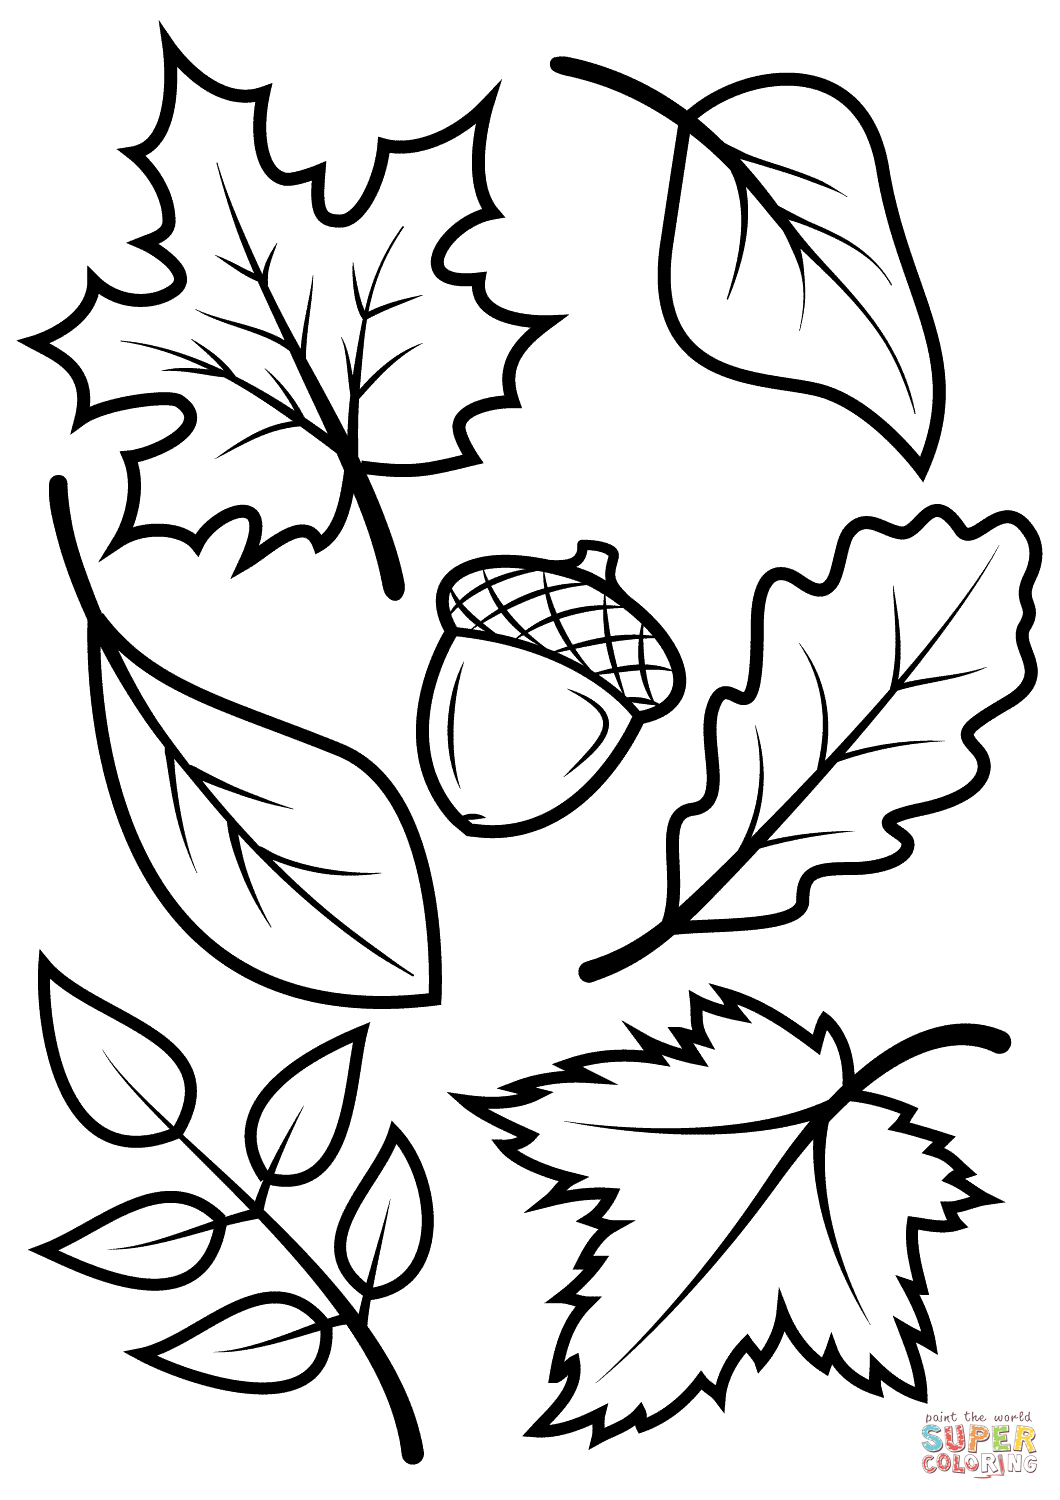 Fall Leaves And Acorn Coloring Page | Free Printable Coloring Pages - Free Printable Fall Coloring Pages